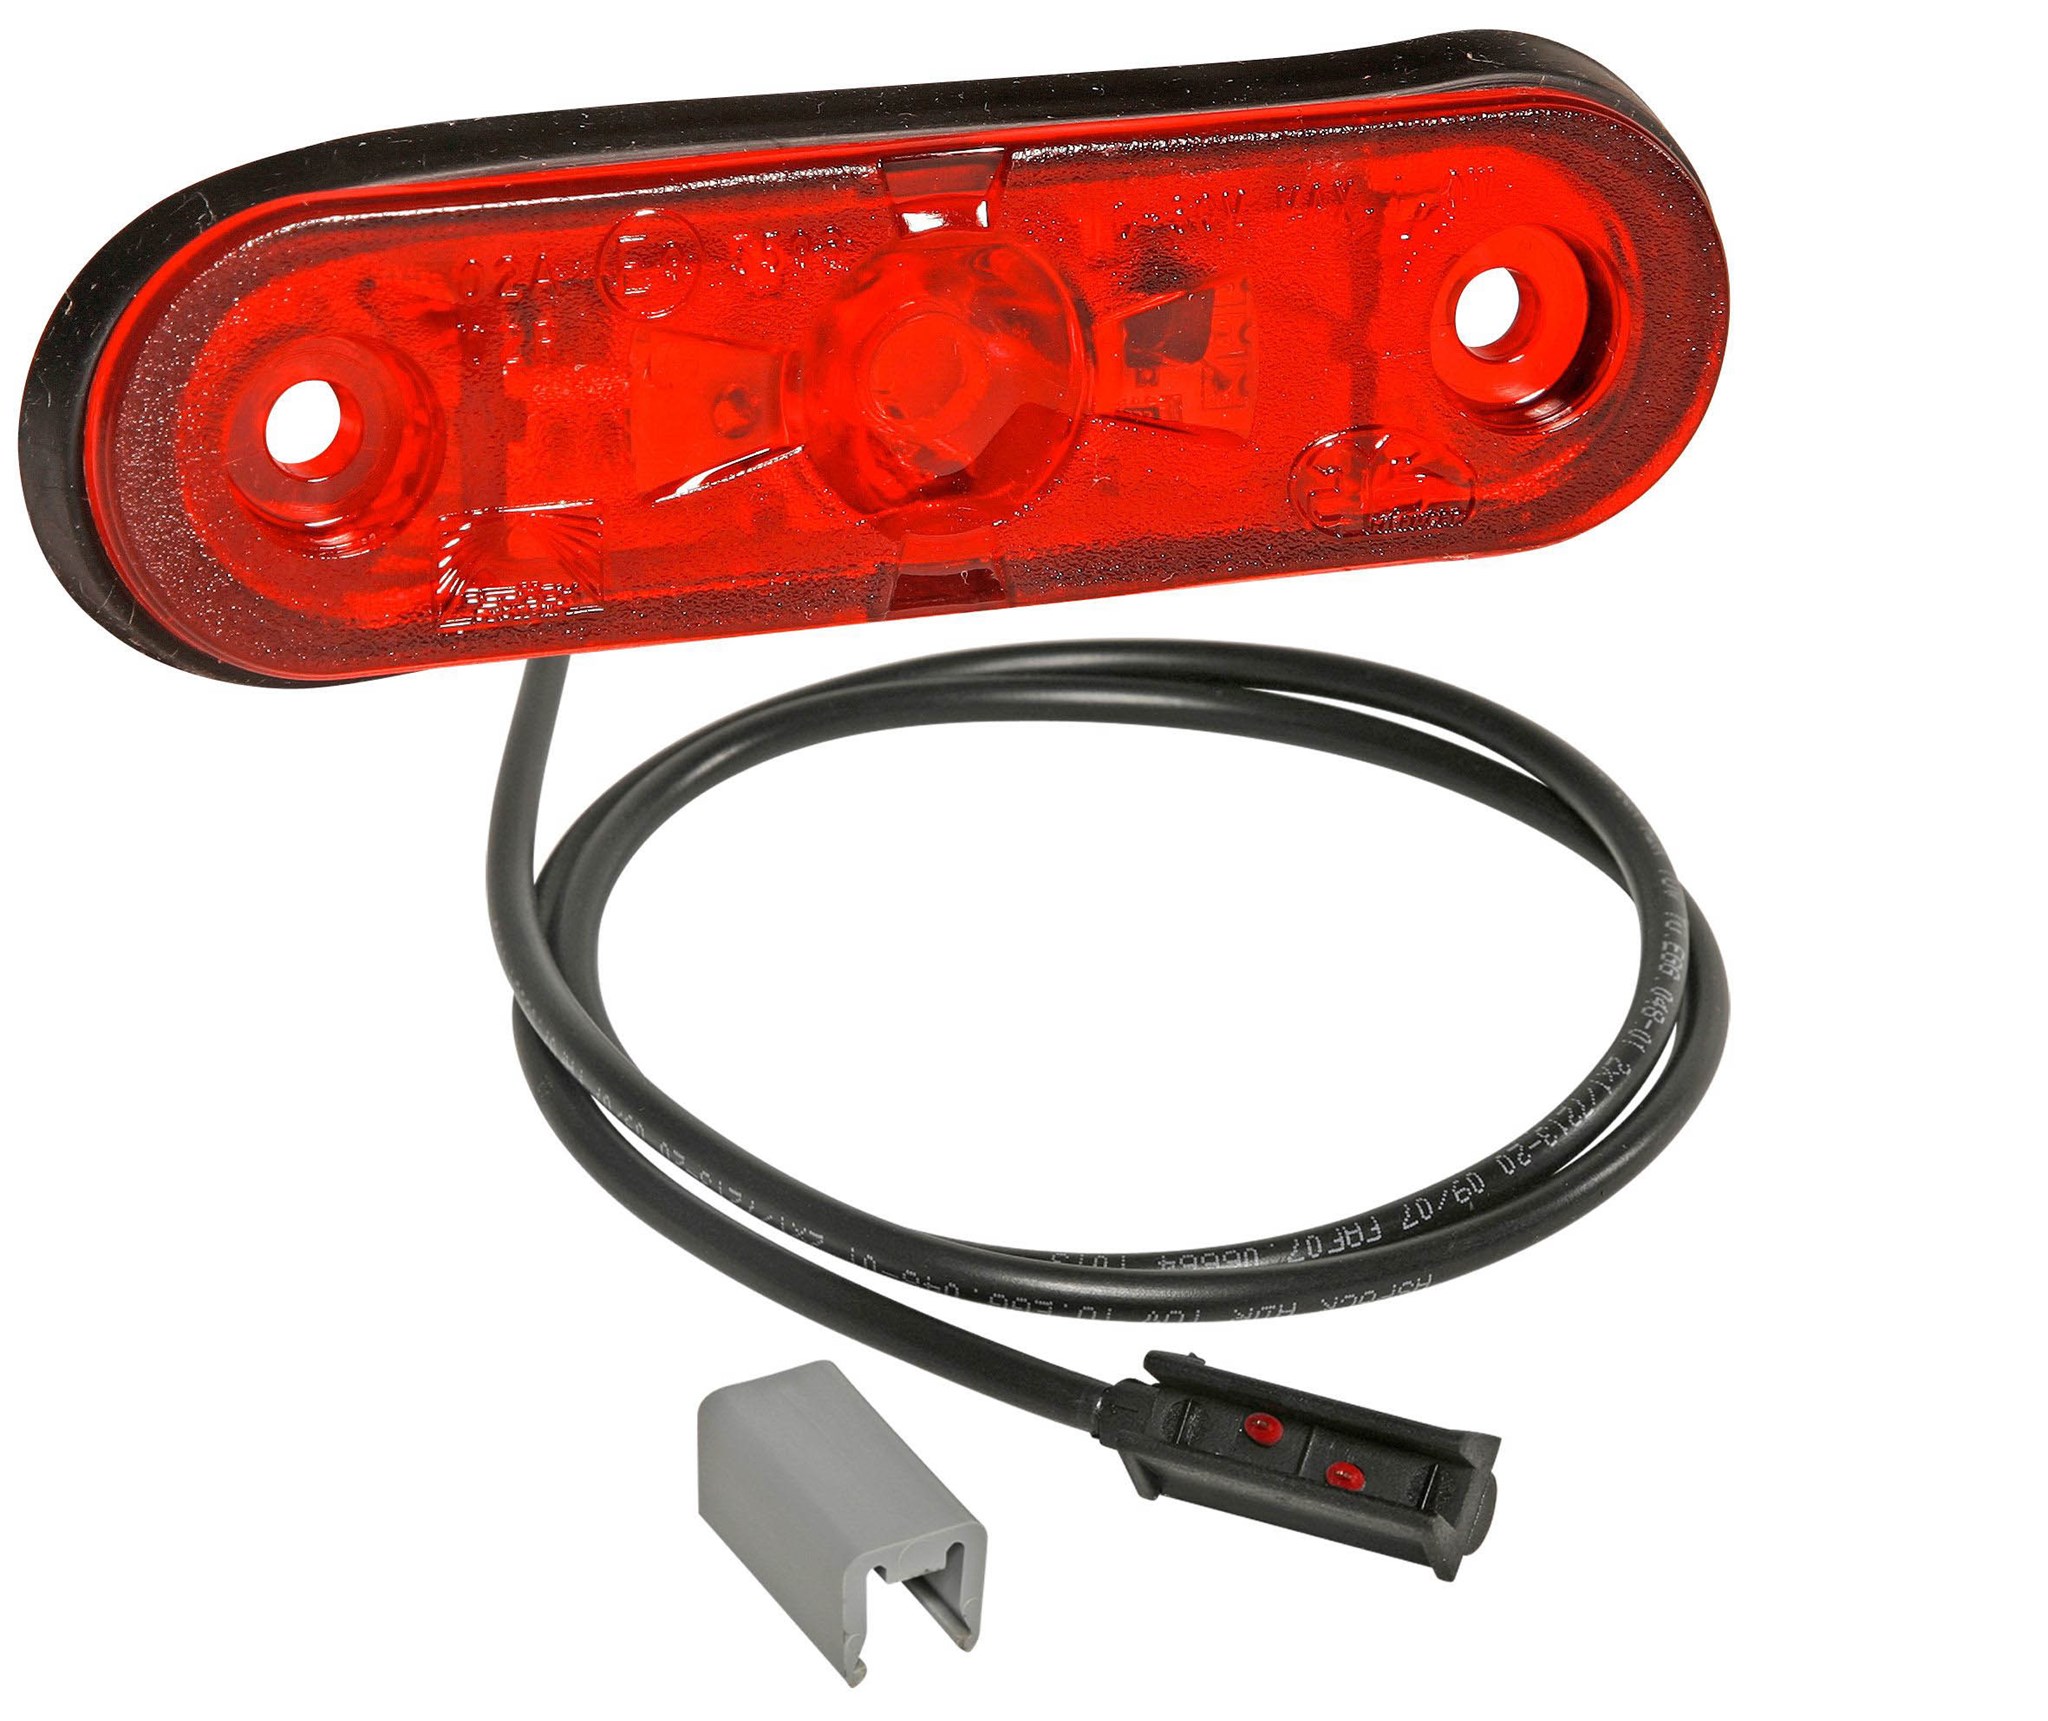 Immagine di Positionleuchte 31-7204-004 Aspöck Posipoint II rot LED P&R  500mm